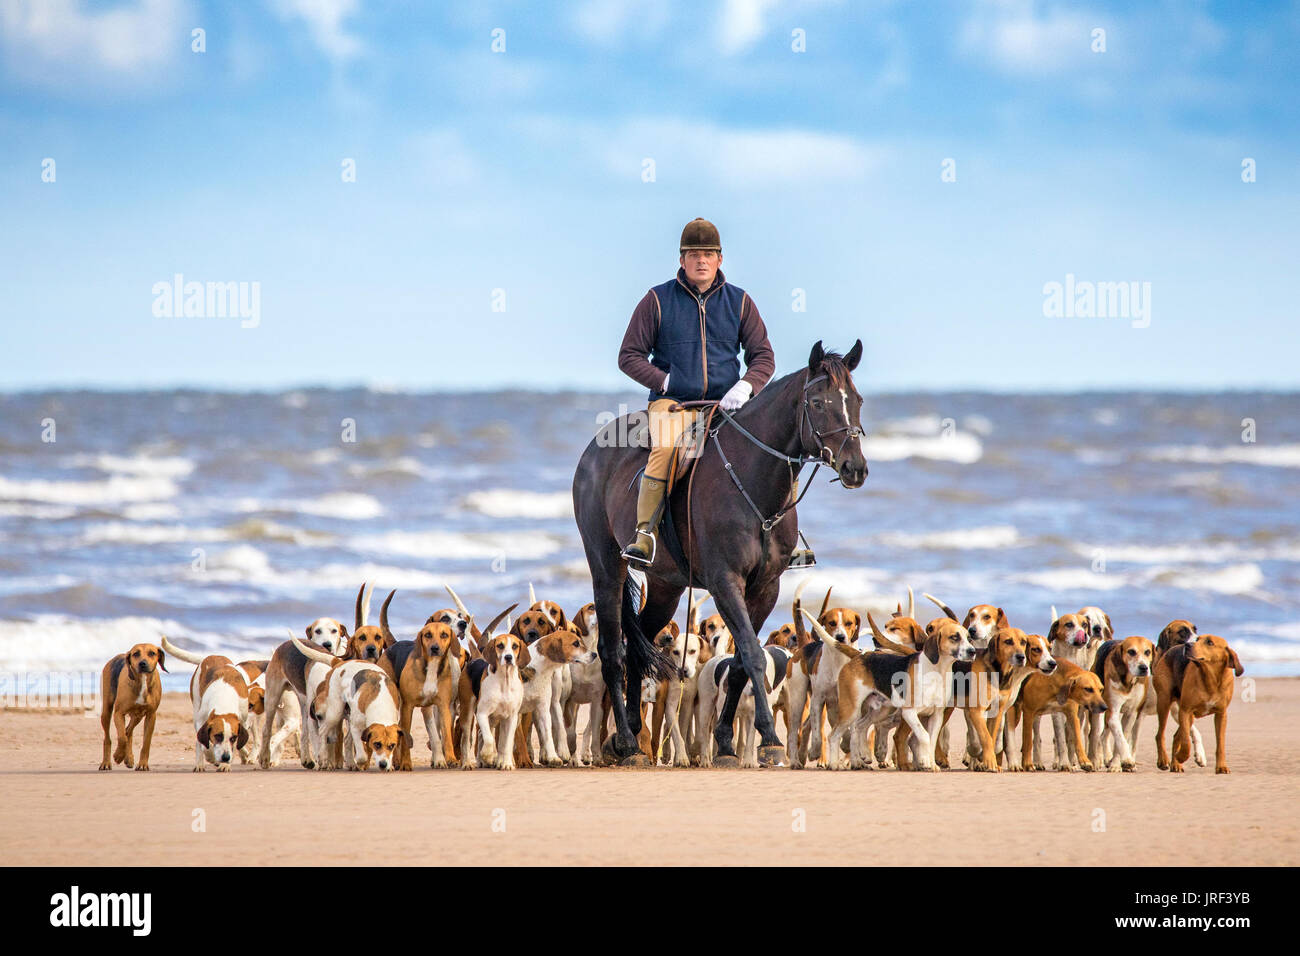 Fox Hounds on the beach in Southport, Merseyside, August 2017. UK Weather.   A beautiful sunny start to the day over the north west coast of England as a Master of Hounds exercises his beloved horse and Harrier hunting dogs on the golden sand of Southport beach in Merseyside.  The Harrier is a medium-sized dog breed of the hound class, used for hunting hares by trailing them. It resembles an English Foxhound but is smaller, though not as small as a Beagle.  Credit: Cernan Elias/Alamy Live News Stock Photo